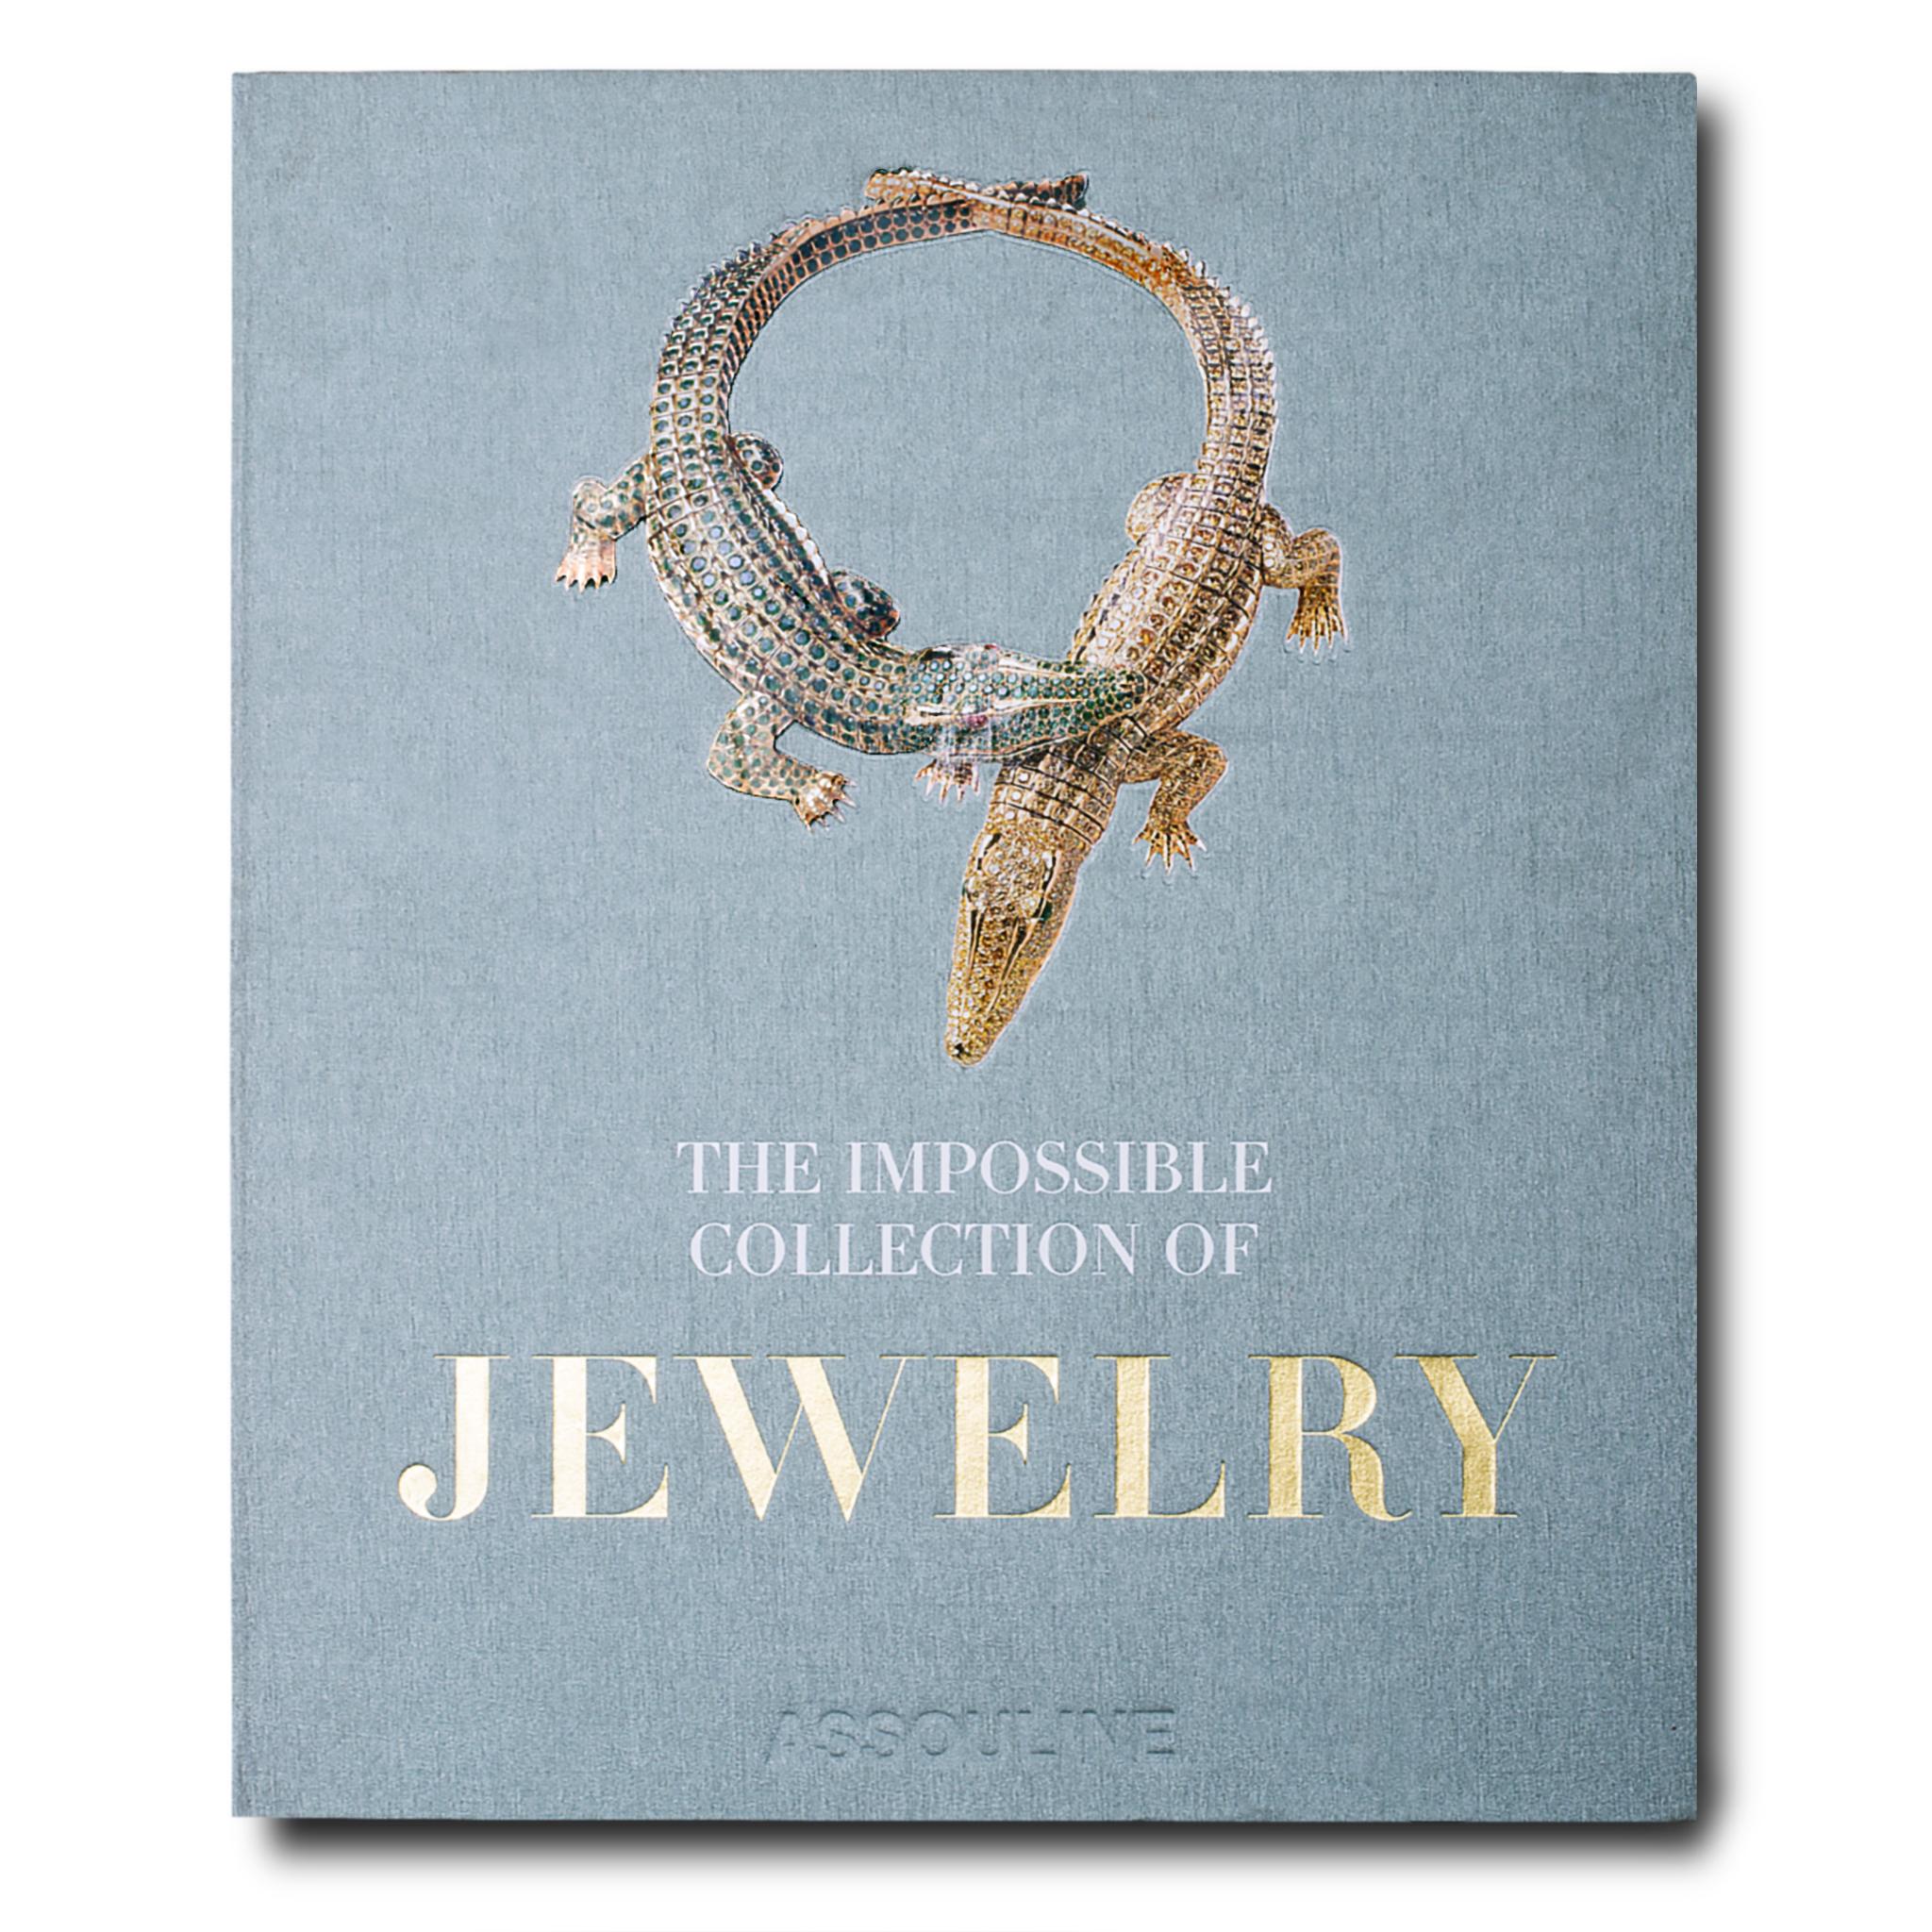 In this magnificent collection of the most spectacular jewels of the twentieth century, fine jewelry historian Vivienne Becker selects the quintessential bijoux that represent the milestones of jewelry design of the last one hundred years. From Art